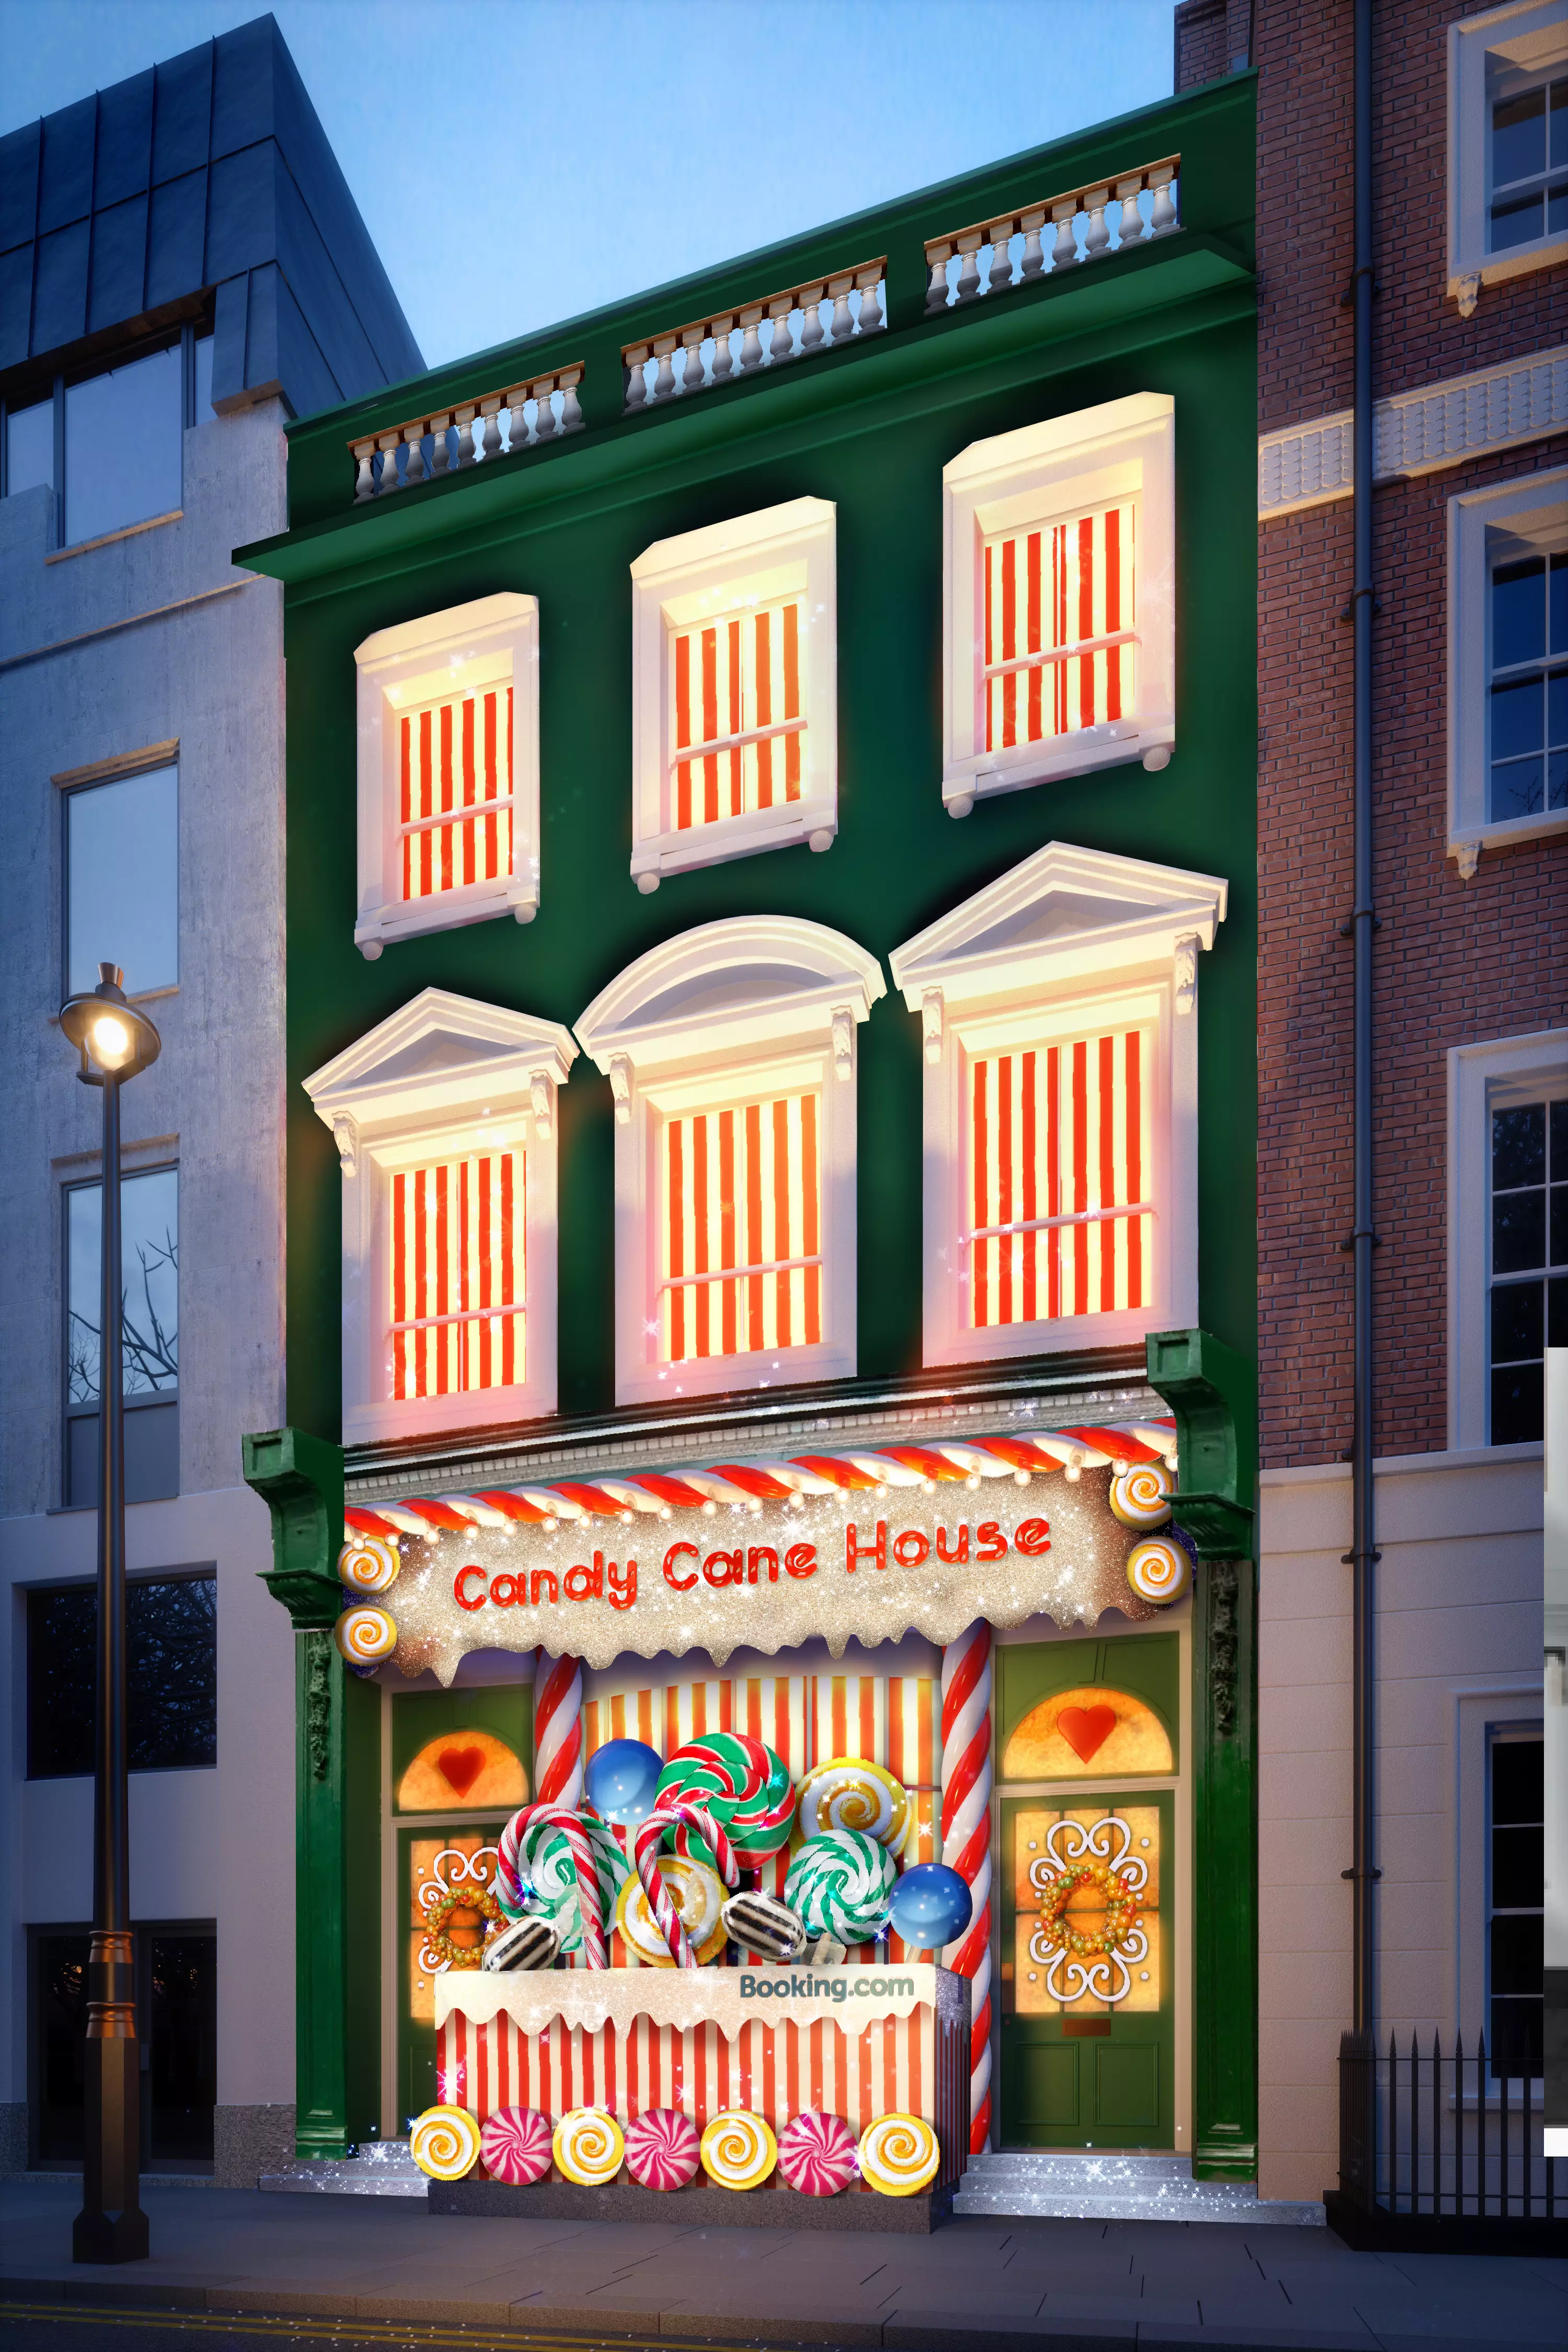 Located in soho, Candy Cane House is unmissable from the outside (